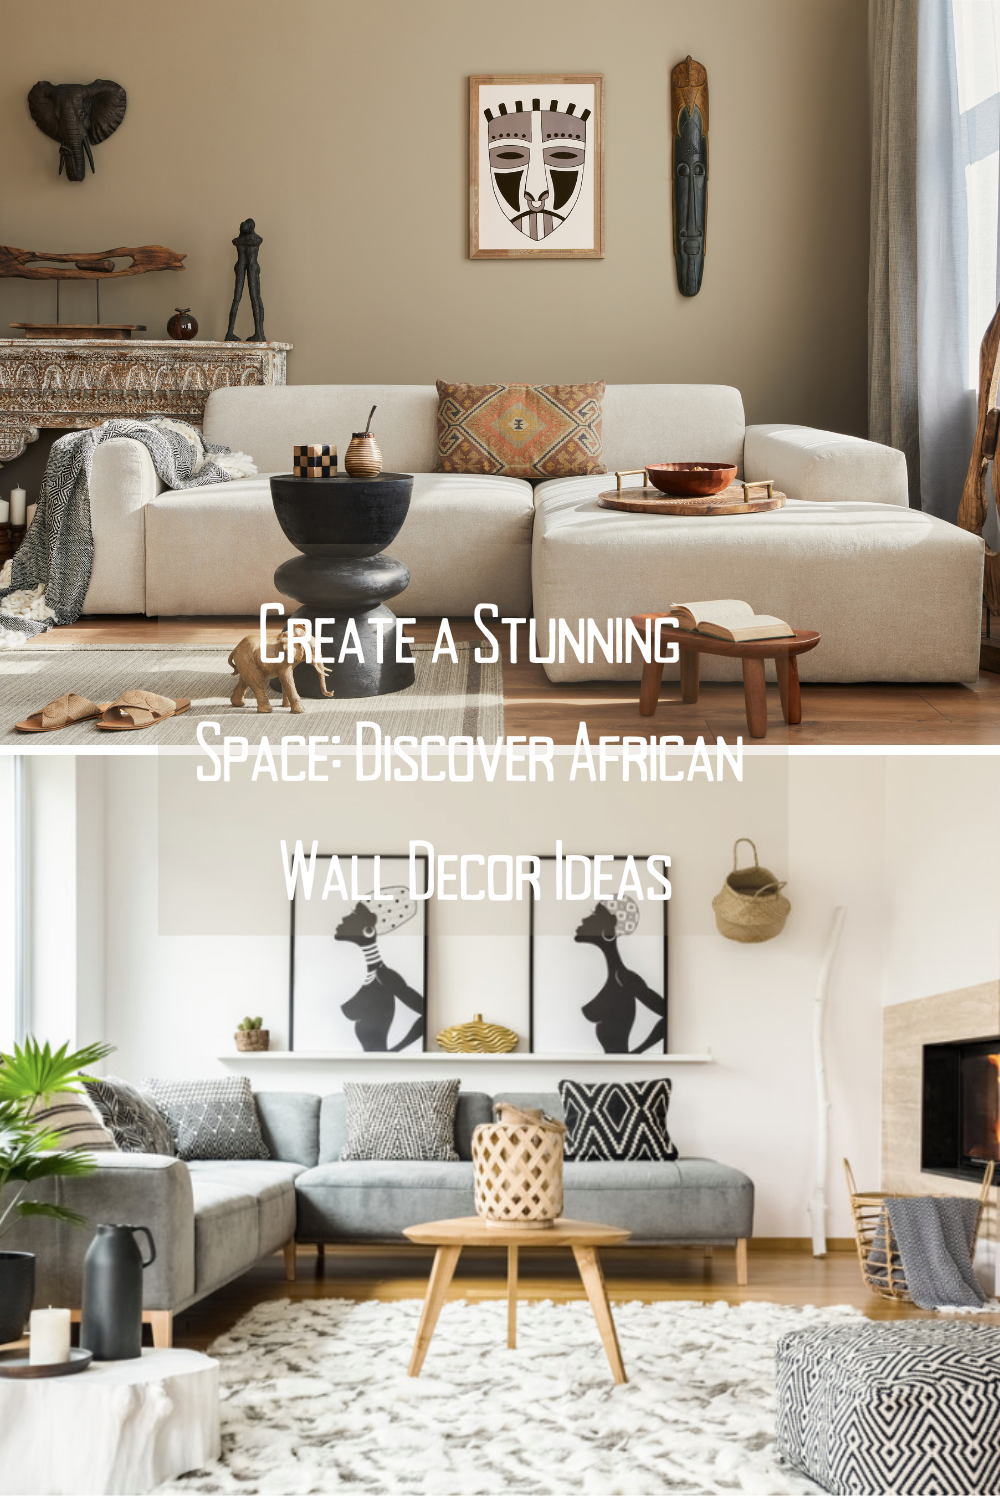 African wall decor 